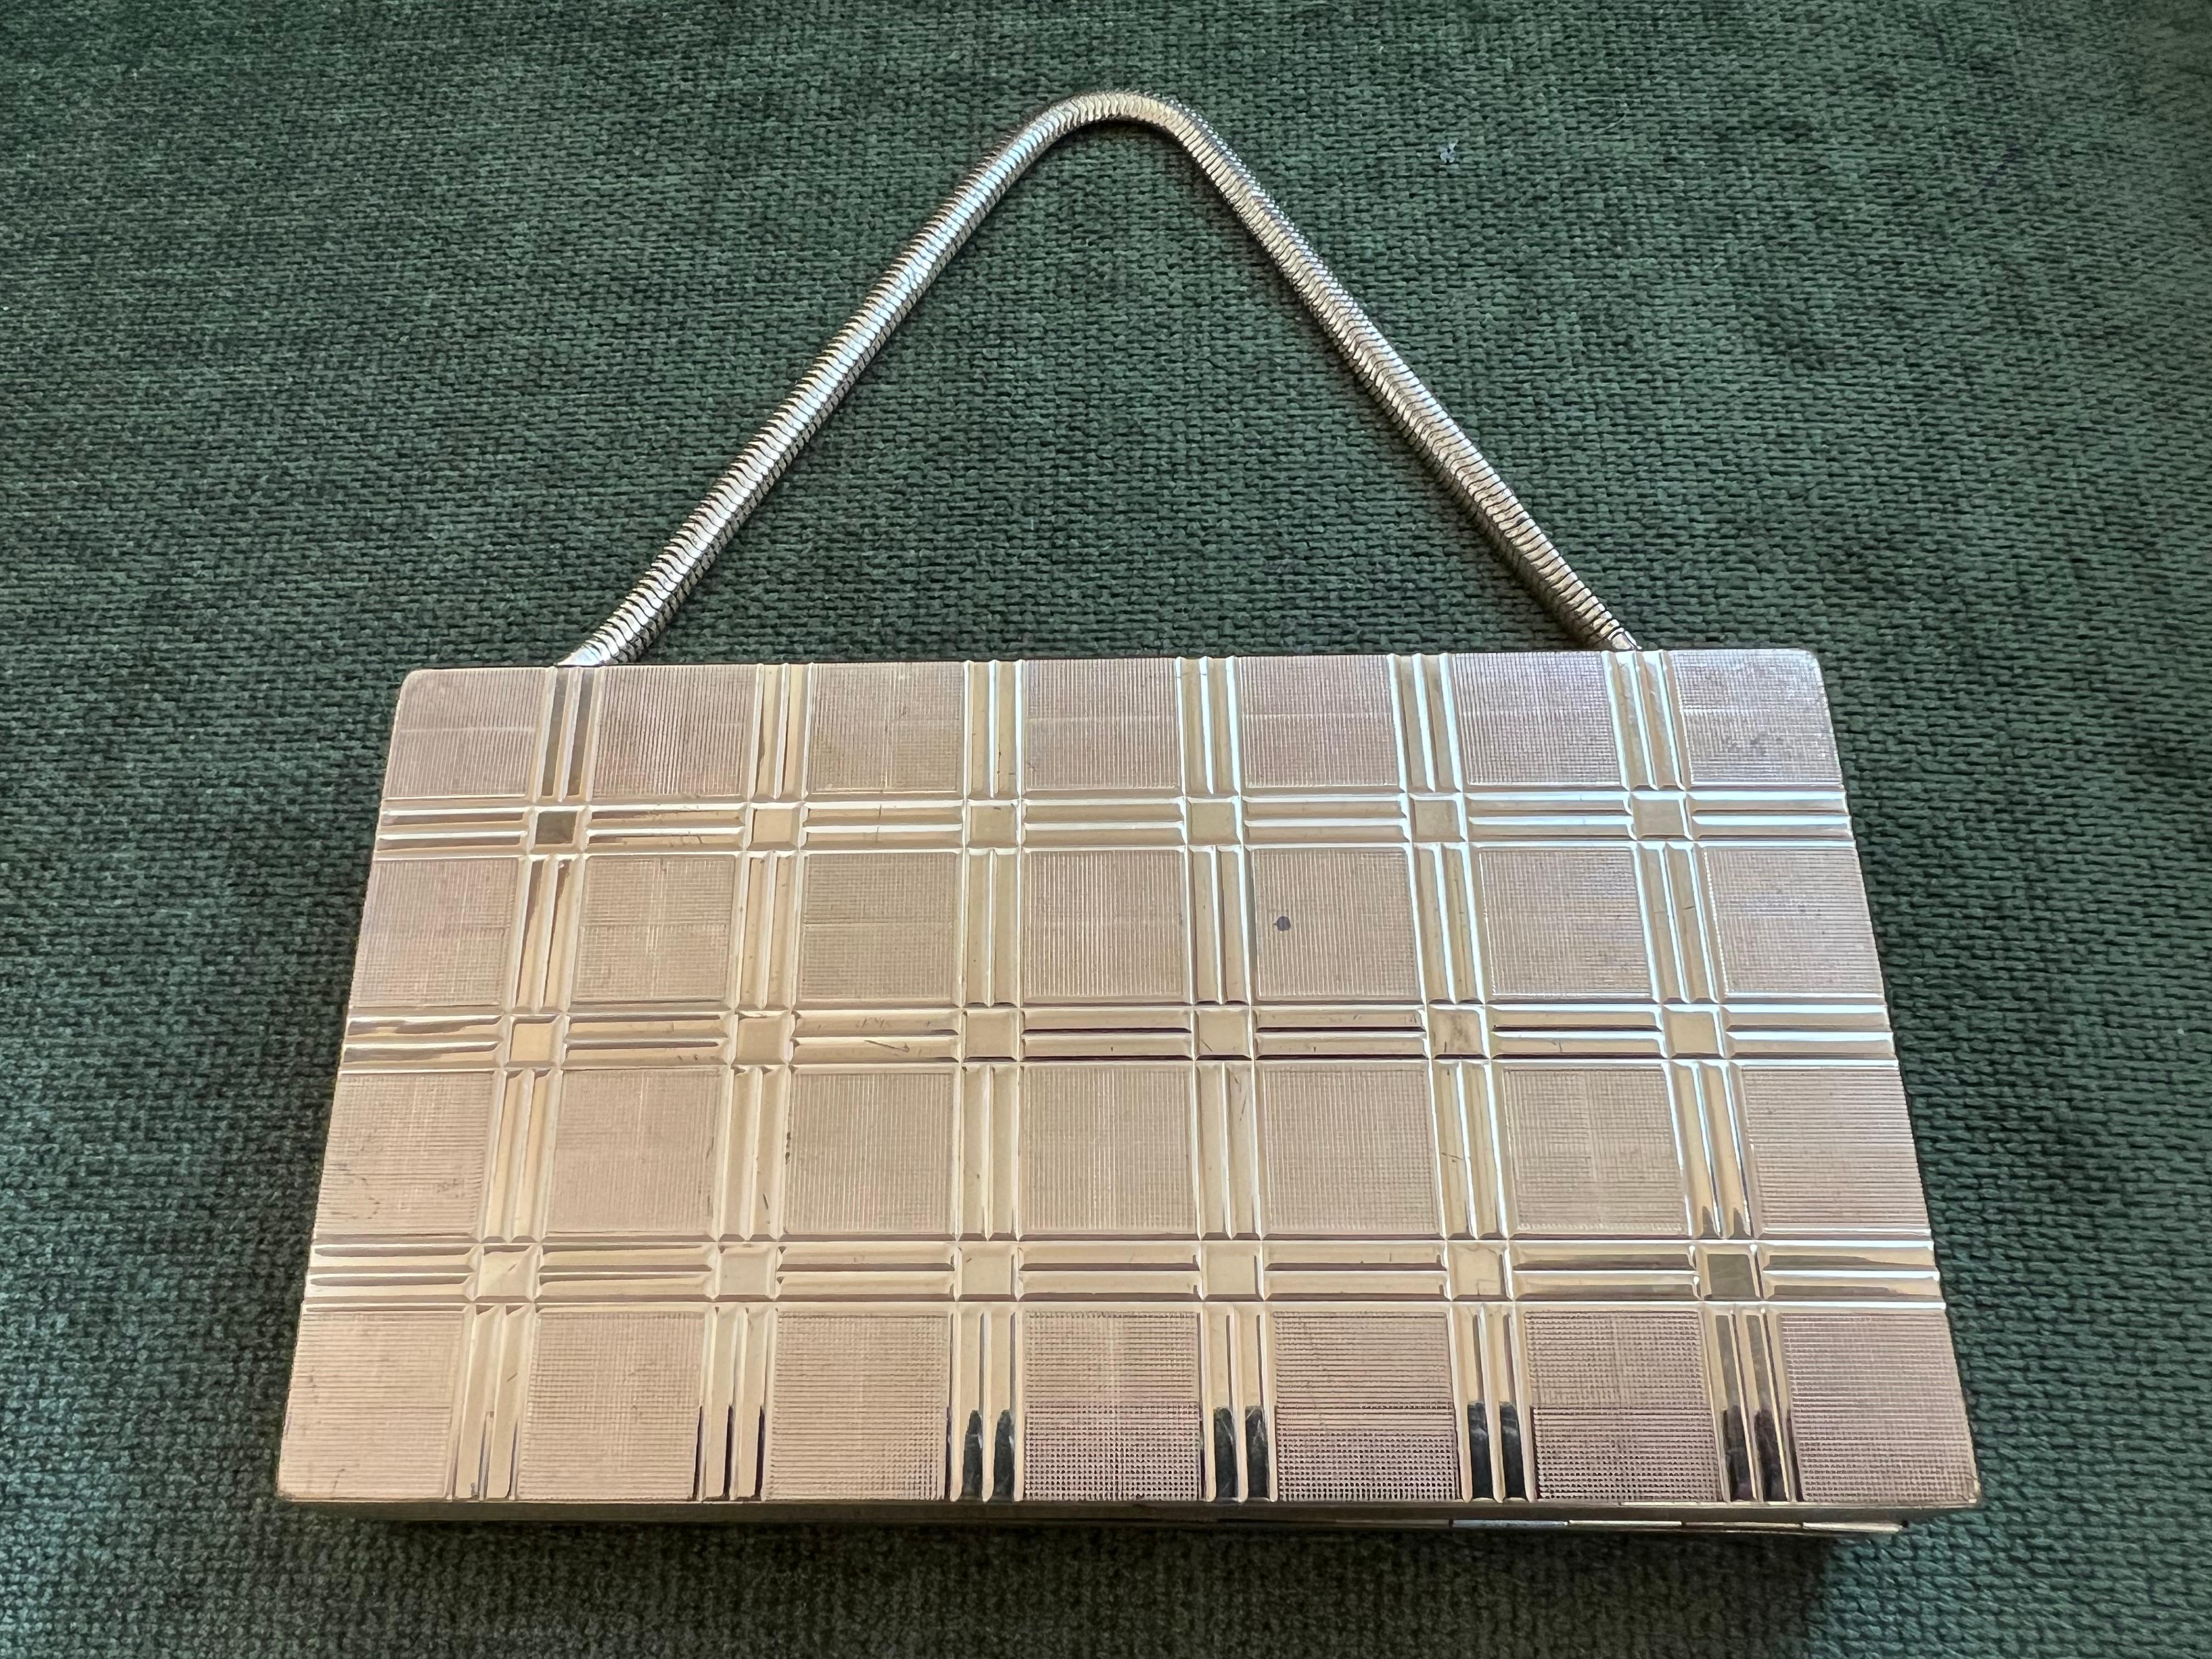 This 1950s mid-century EVANS wristlet compact vanity kit and cigarette case.
Cover still has the pressed powder, gold lipstick case , and the powder puff. This elegant vintage wristlet is in excellent condition and perfectly giftable in quality and